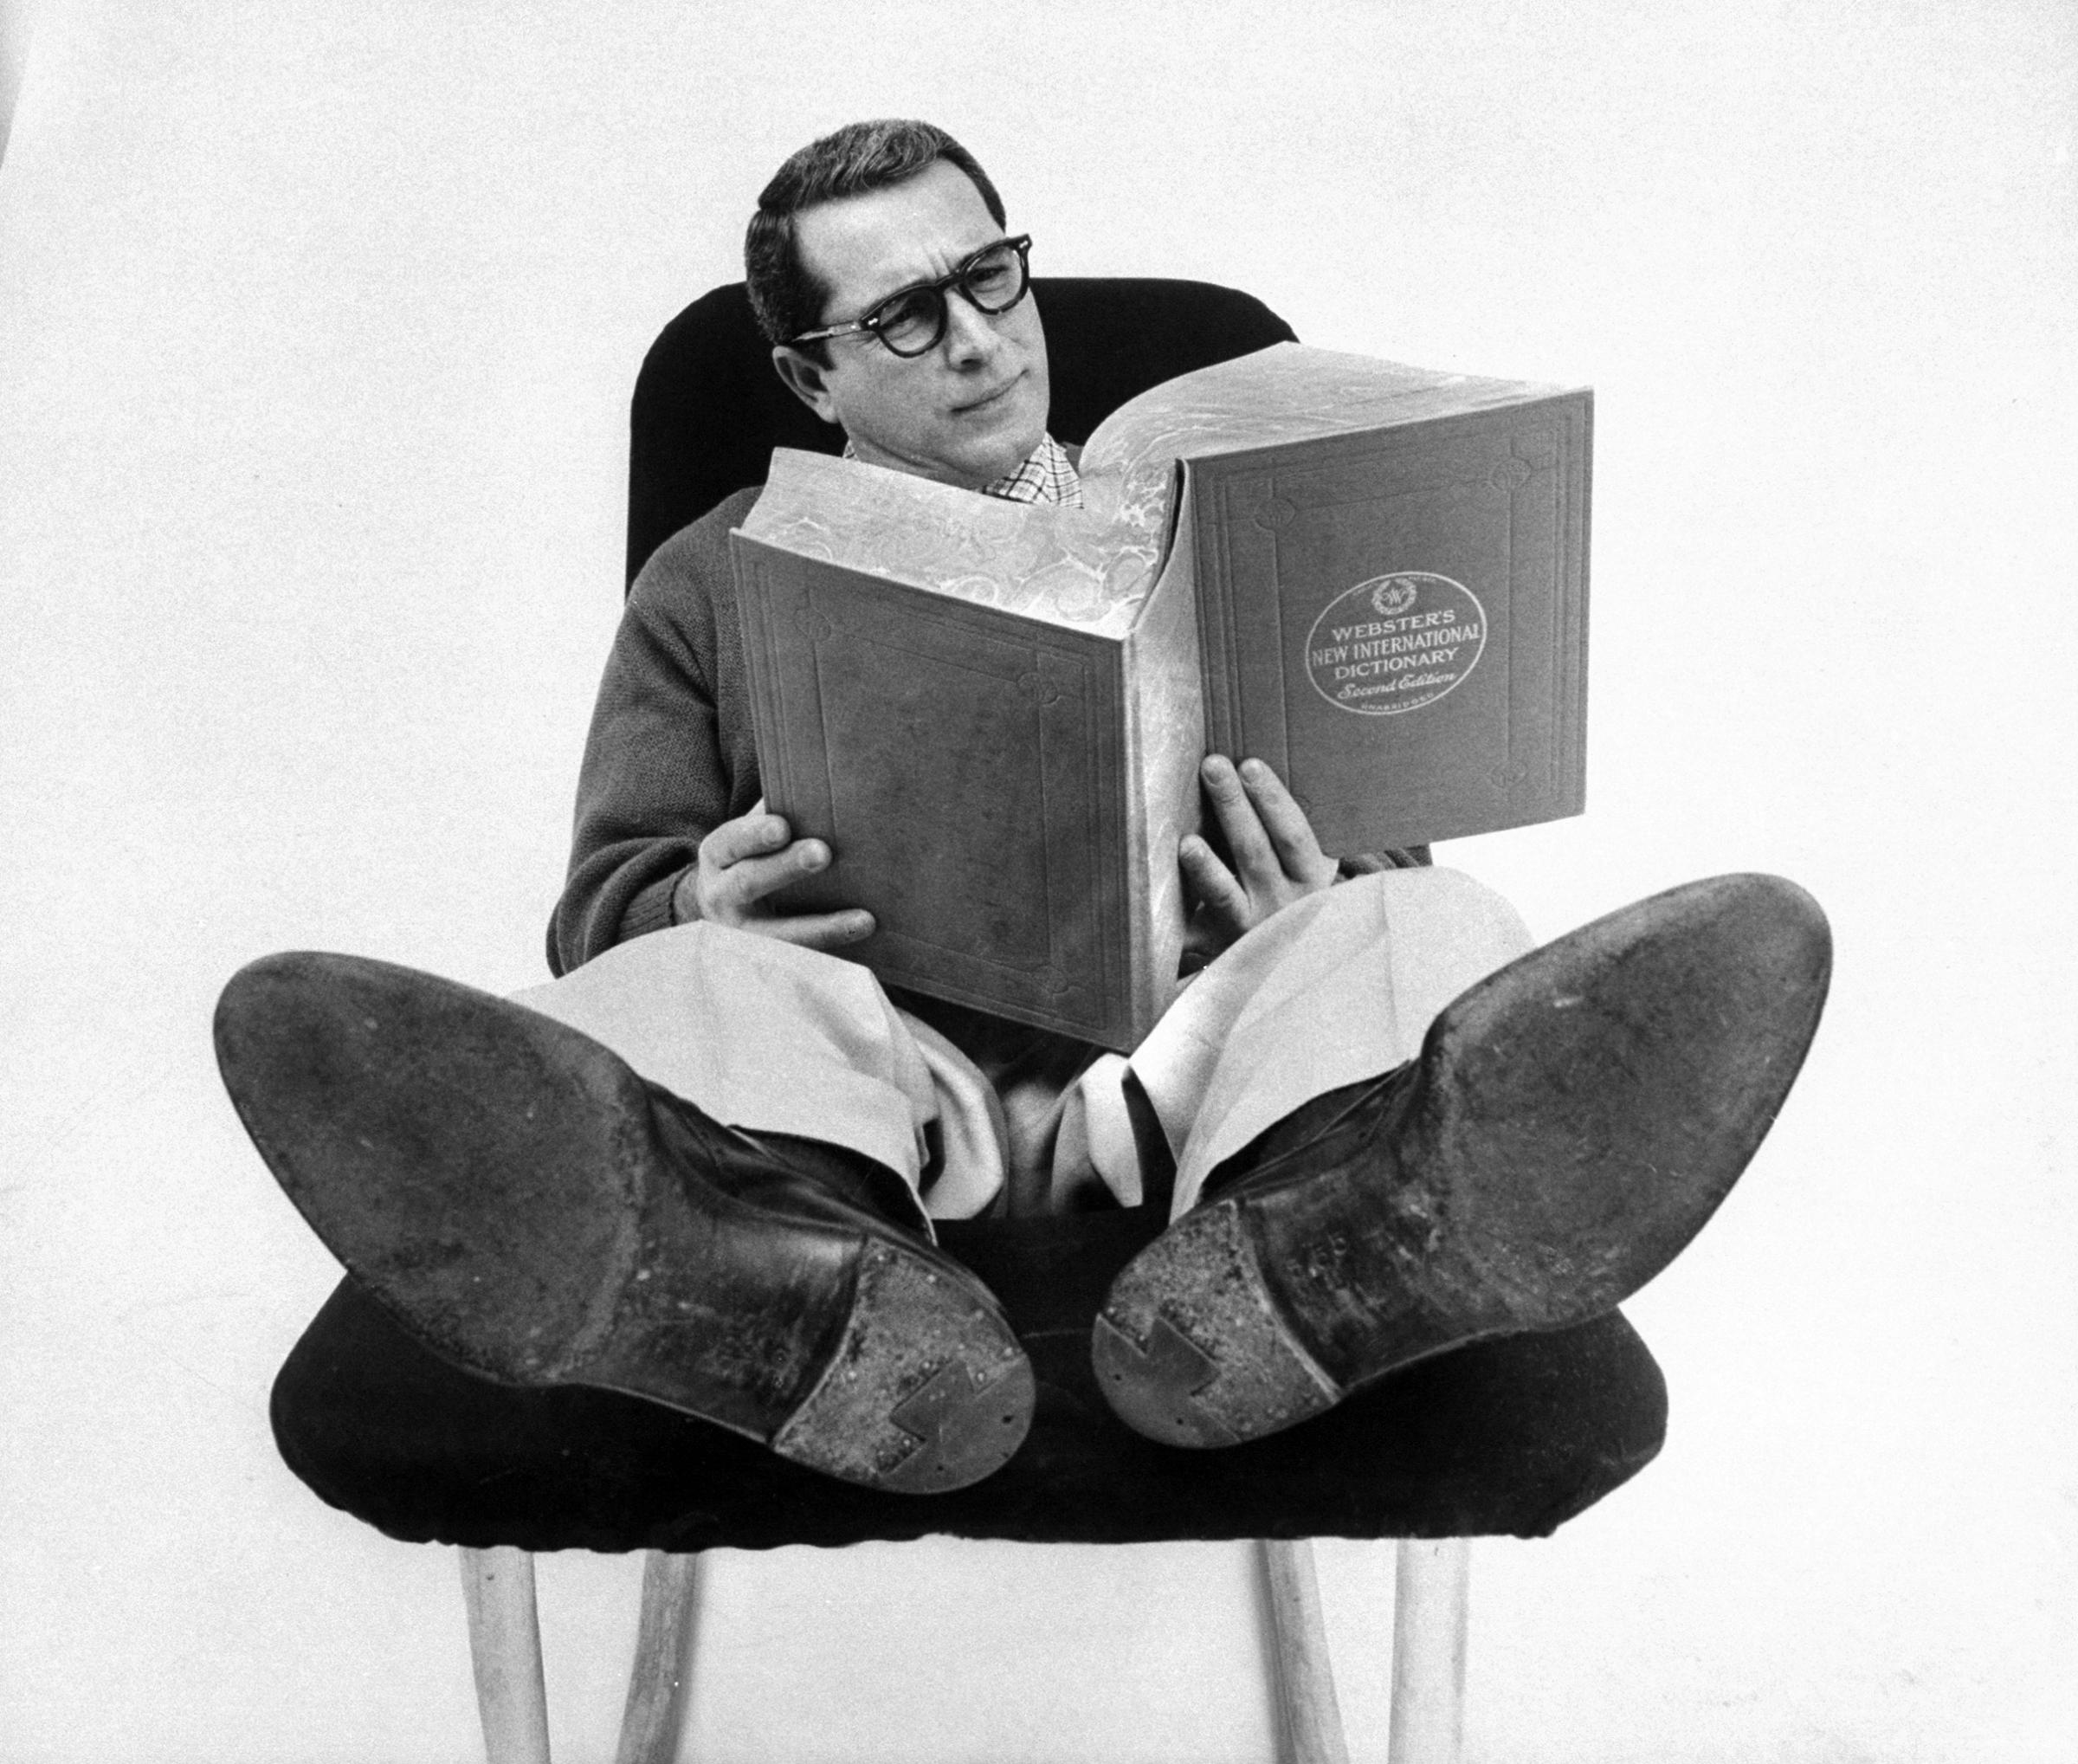 He must be well read. Wearing his glasses and stretched out with a weighty book, he fulfills one requirement of the perfect husband, who must read. A husband should also have a good education, be intelligent but always willing to put his book down and jump to carry groceries.